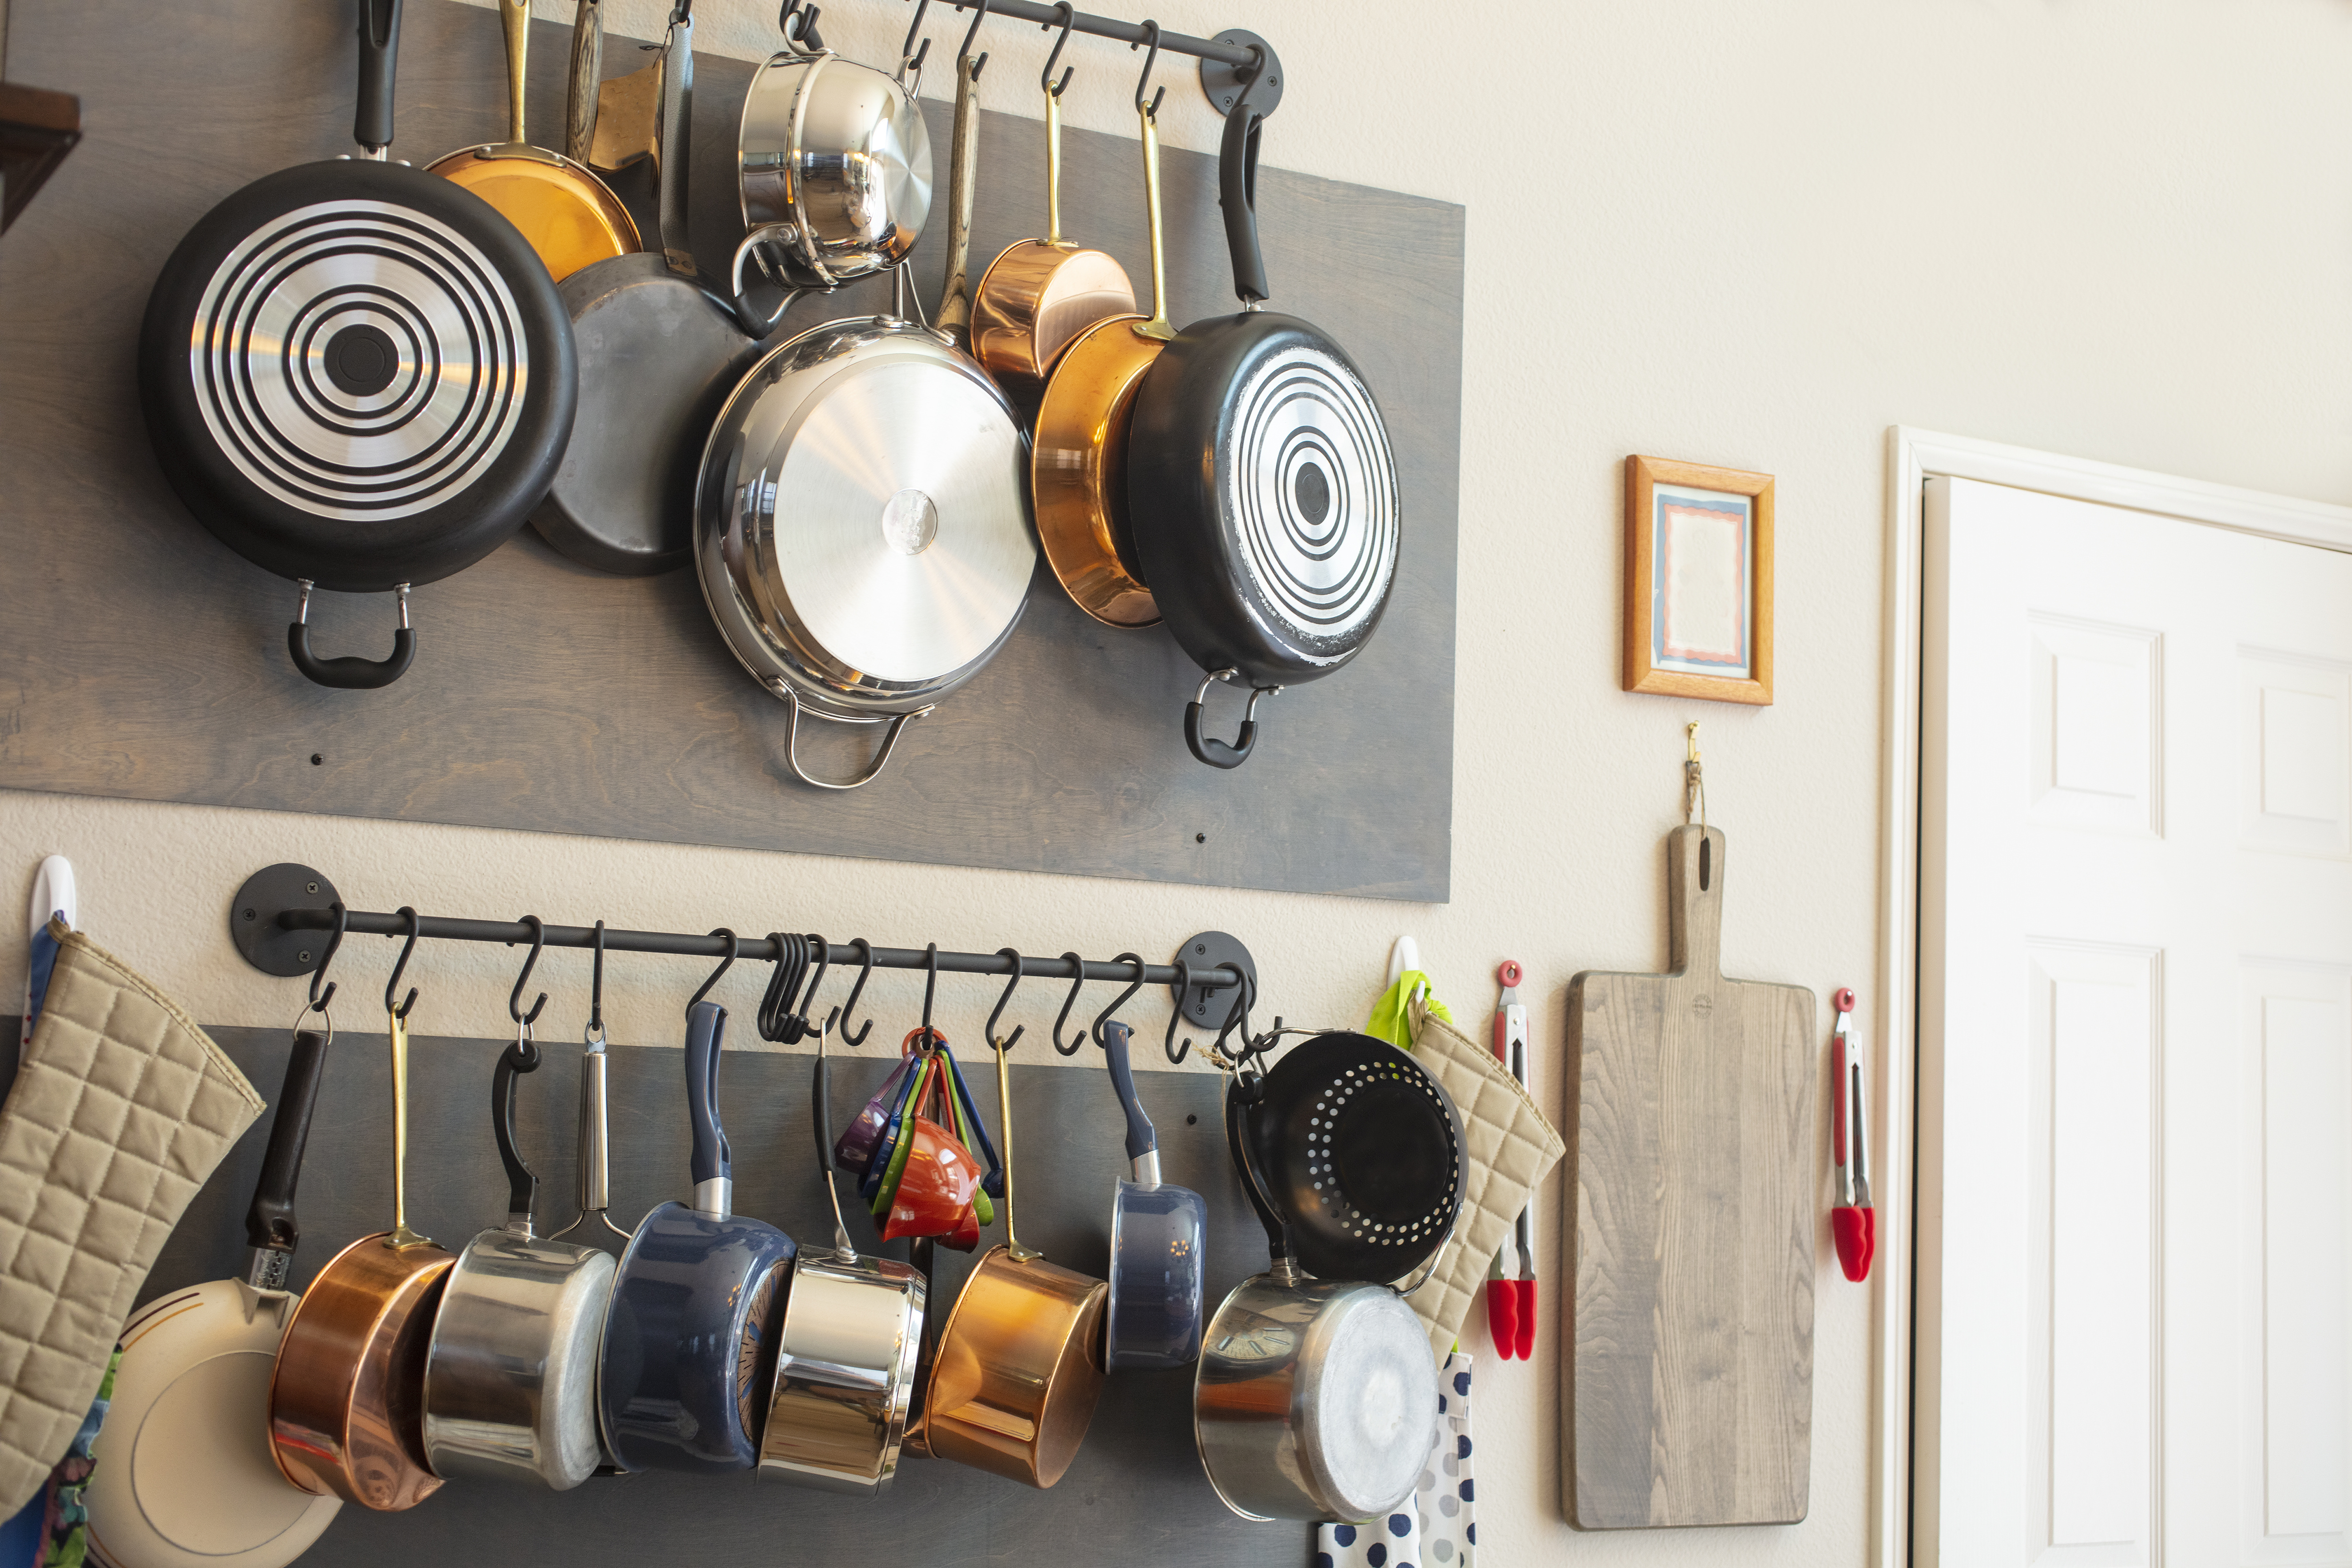 Classic Pot & Pan Hanging Rack for Above the Stove Full Steel Kitchen Organizer 